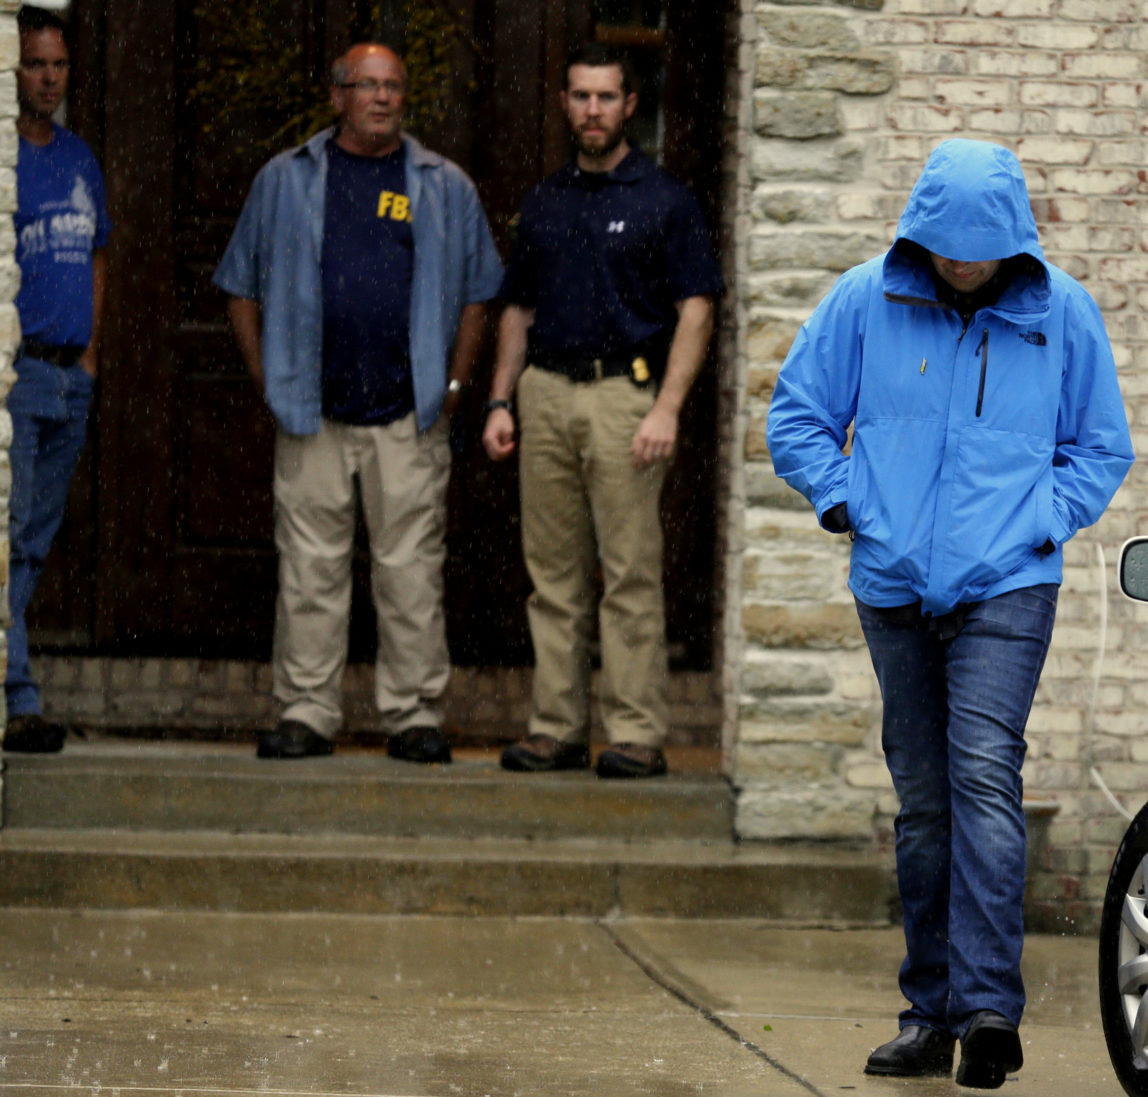 Subway restaurant spokesman Jared Fogle walks to a waiting car as he leaves his home, in Zionsville, Ind. A raid at Fogle's home on Tuesday is just the latest bad news to hit the ubiquitous sandwich chain. The company has been struggling with sales, its CEO is being treated for cancer and it’s trying to convince customers about the quality and value of its food. (AP Photo/Michael Conroy)